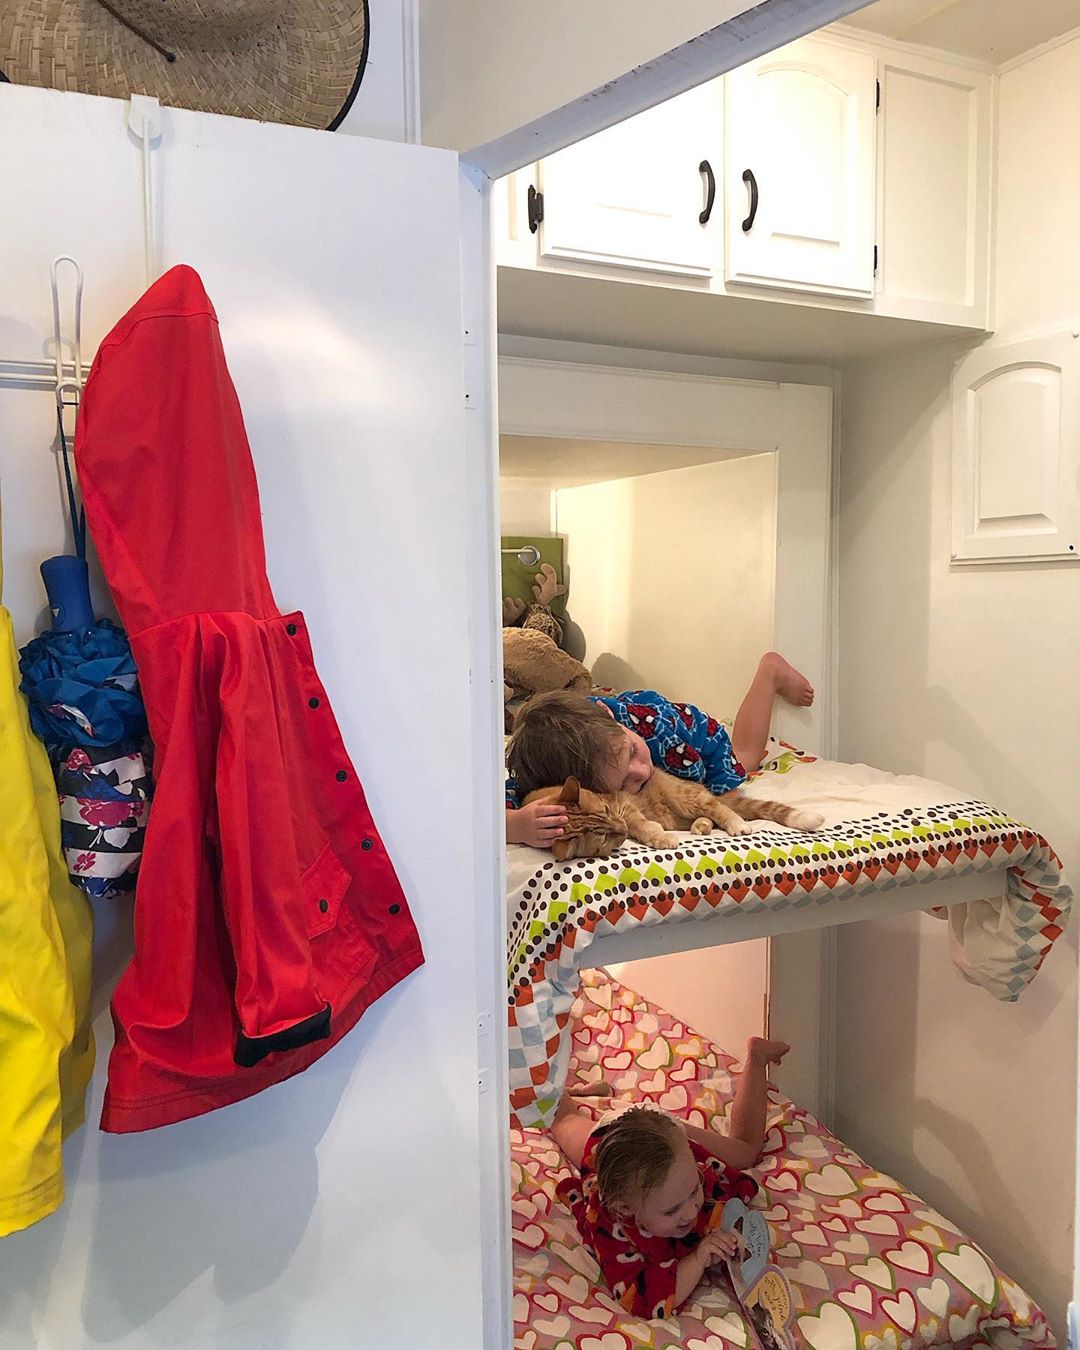 RV bunk beds with boy toddler petting cat on top bunk